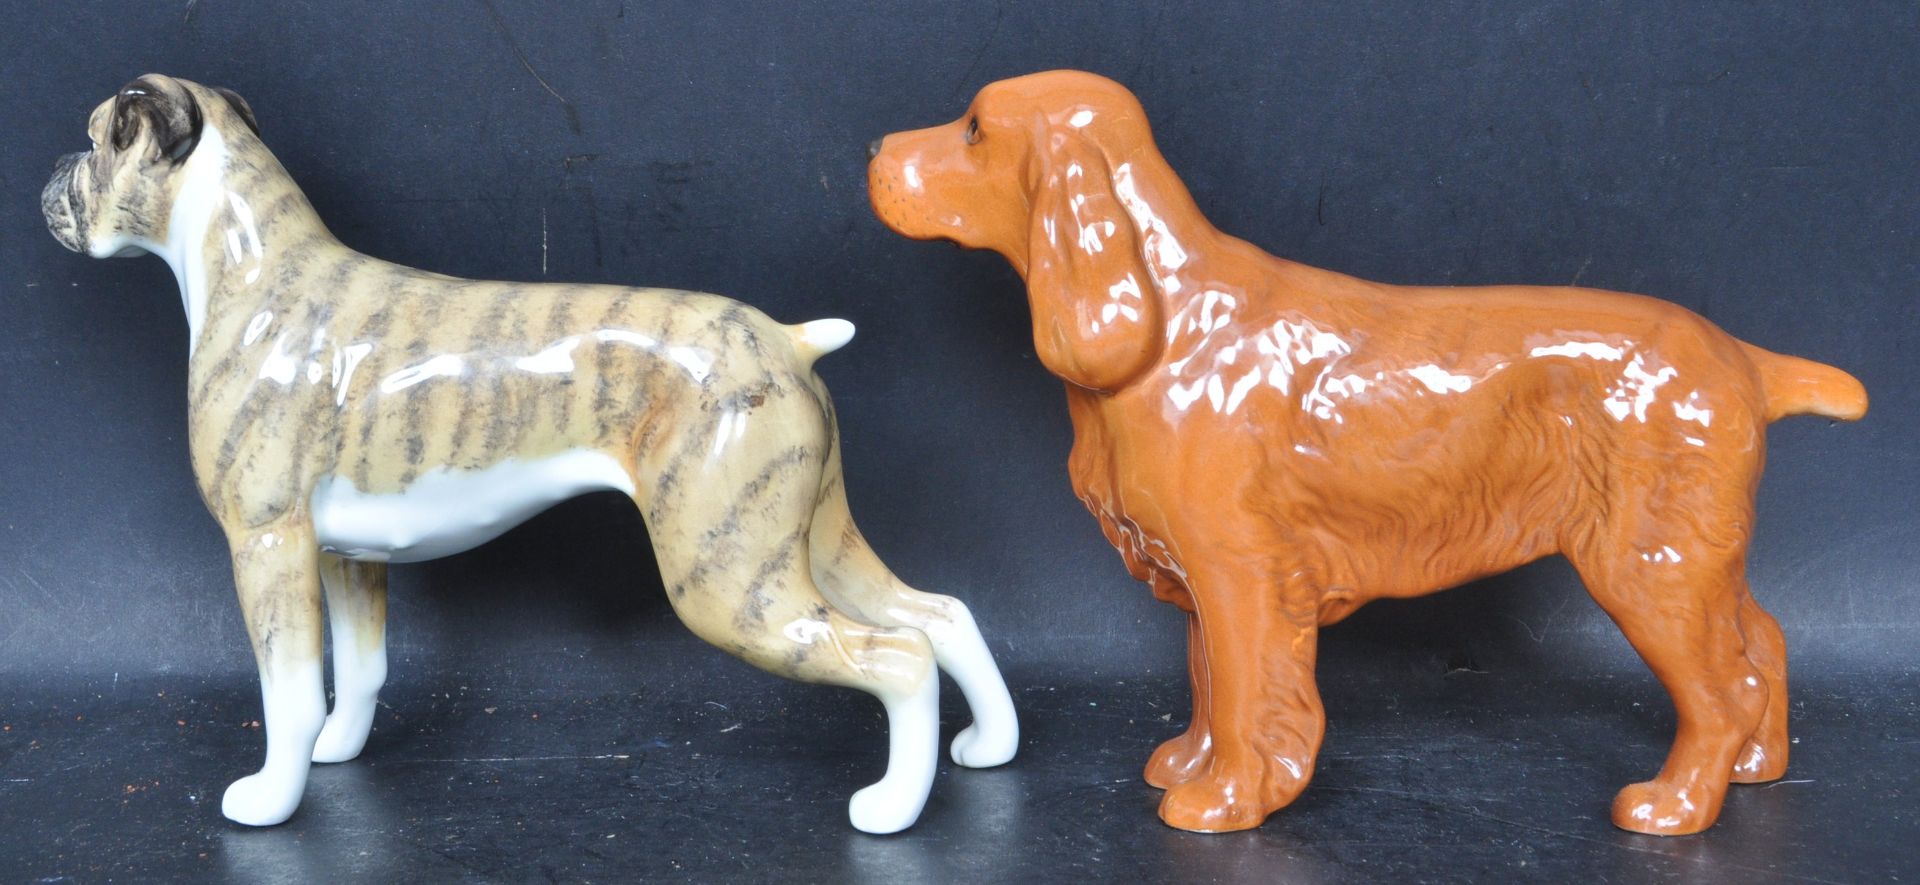 GROUP OF TWO CERAMIC PORCELAIN DOG FIGURINES BY BESWICK - Image 3 of 8